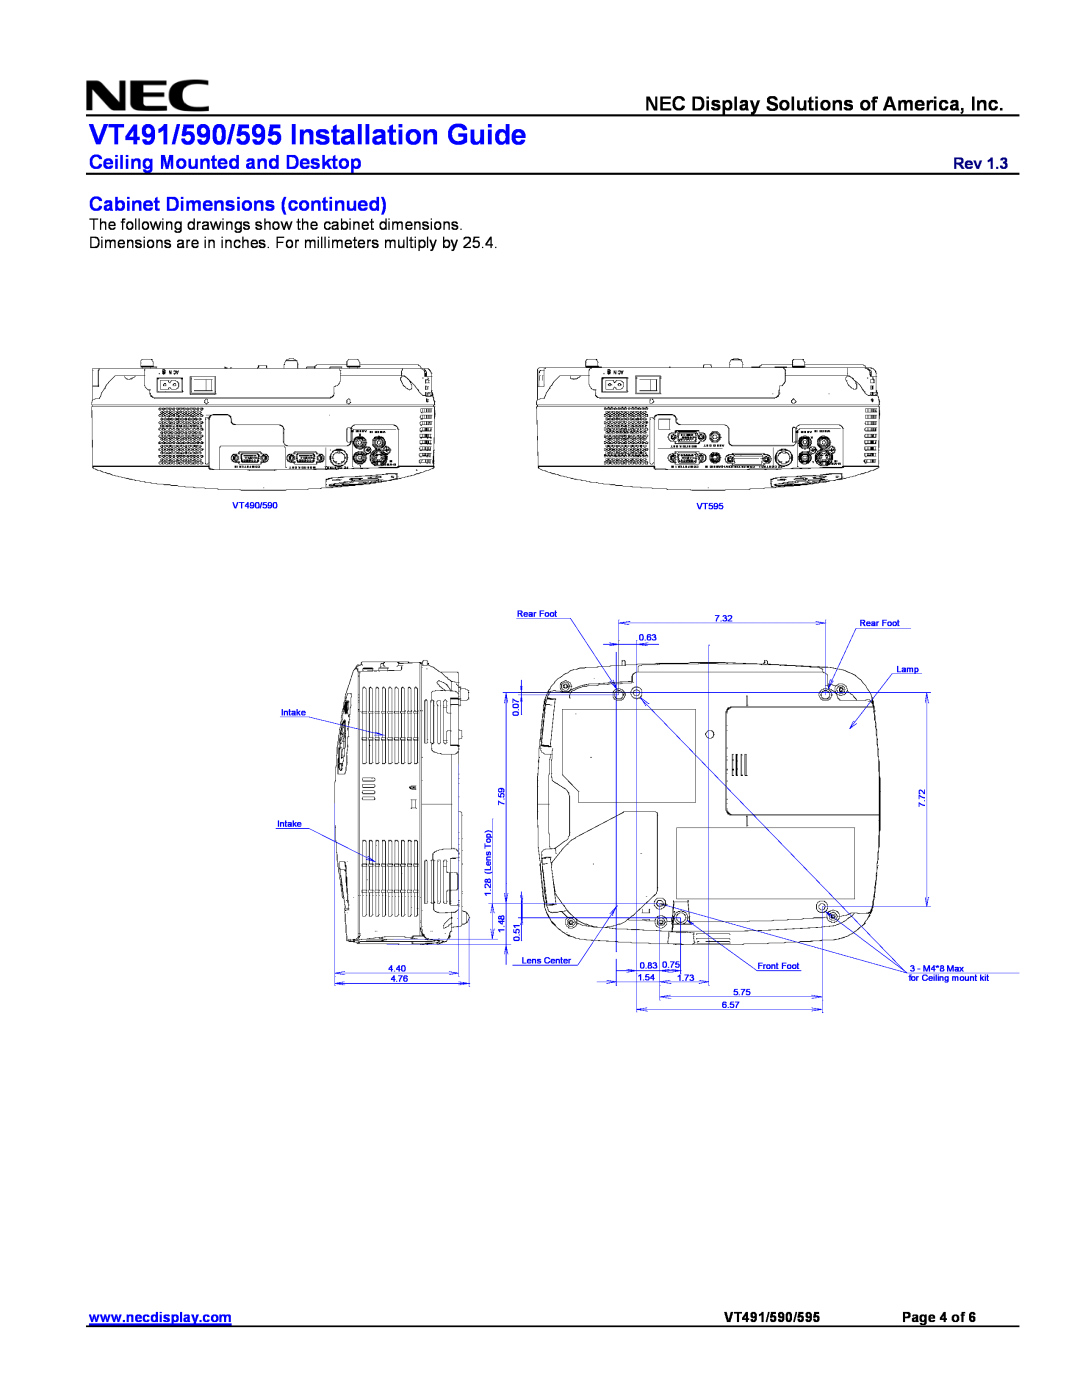 NEC Cabinet Dimensions continued, VT491/590/595 Installation Guide, NEC Display Solutions of America, Inc, Page 4 of 